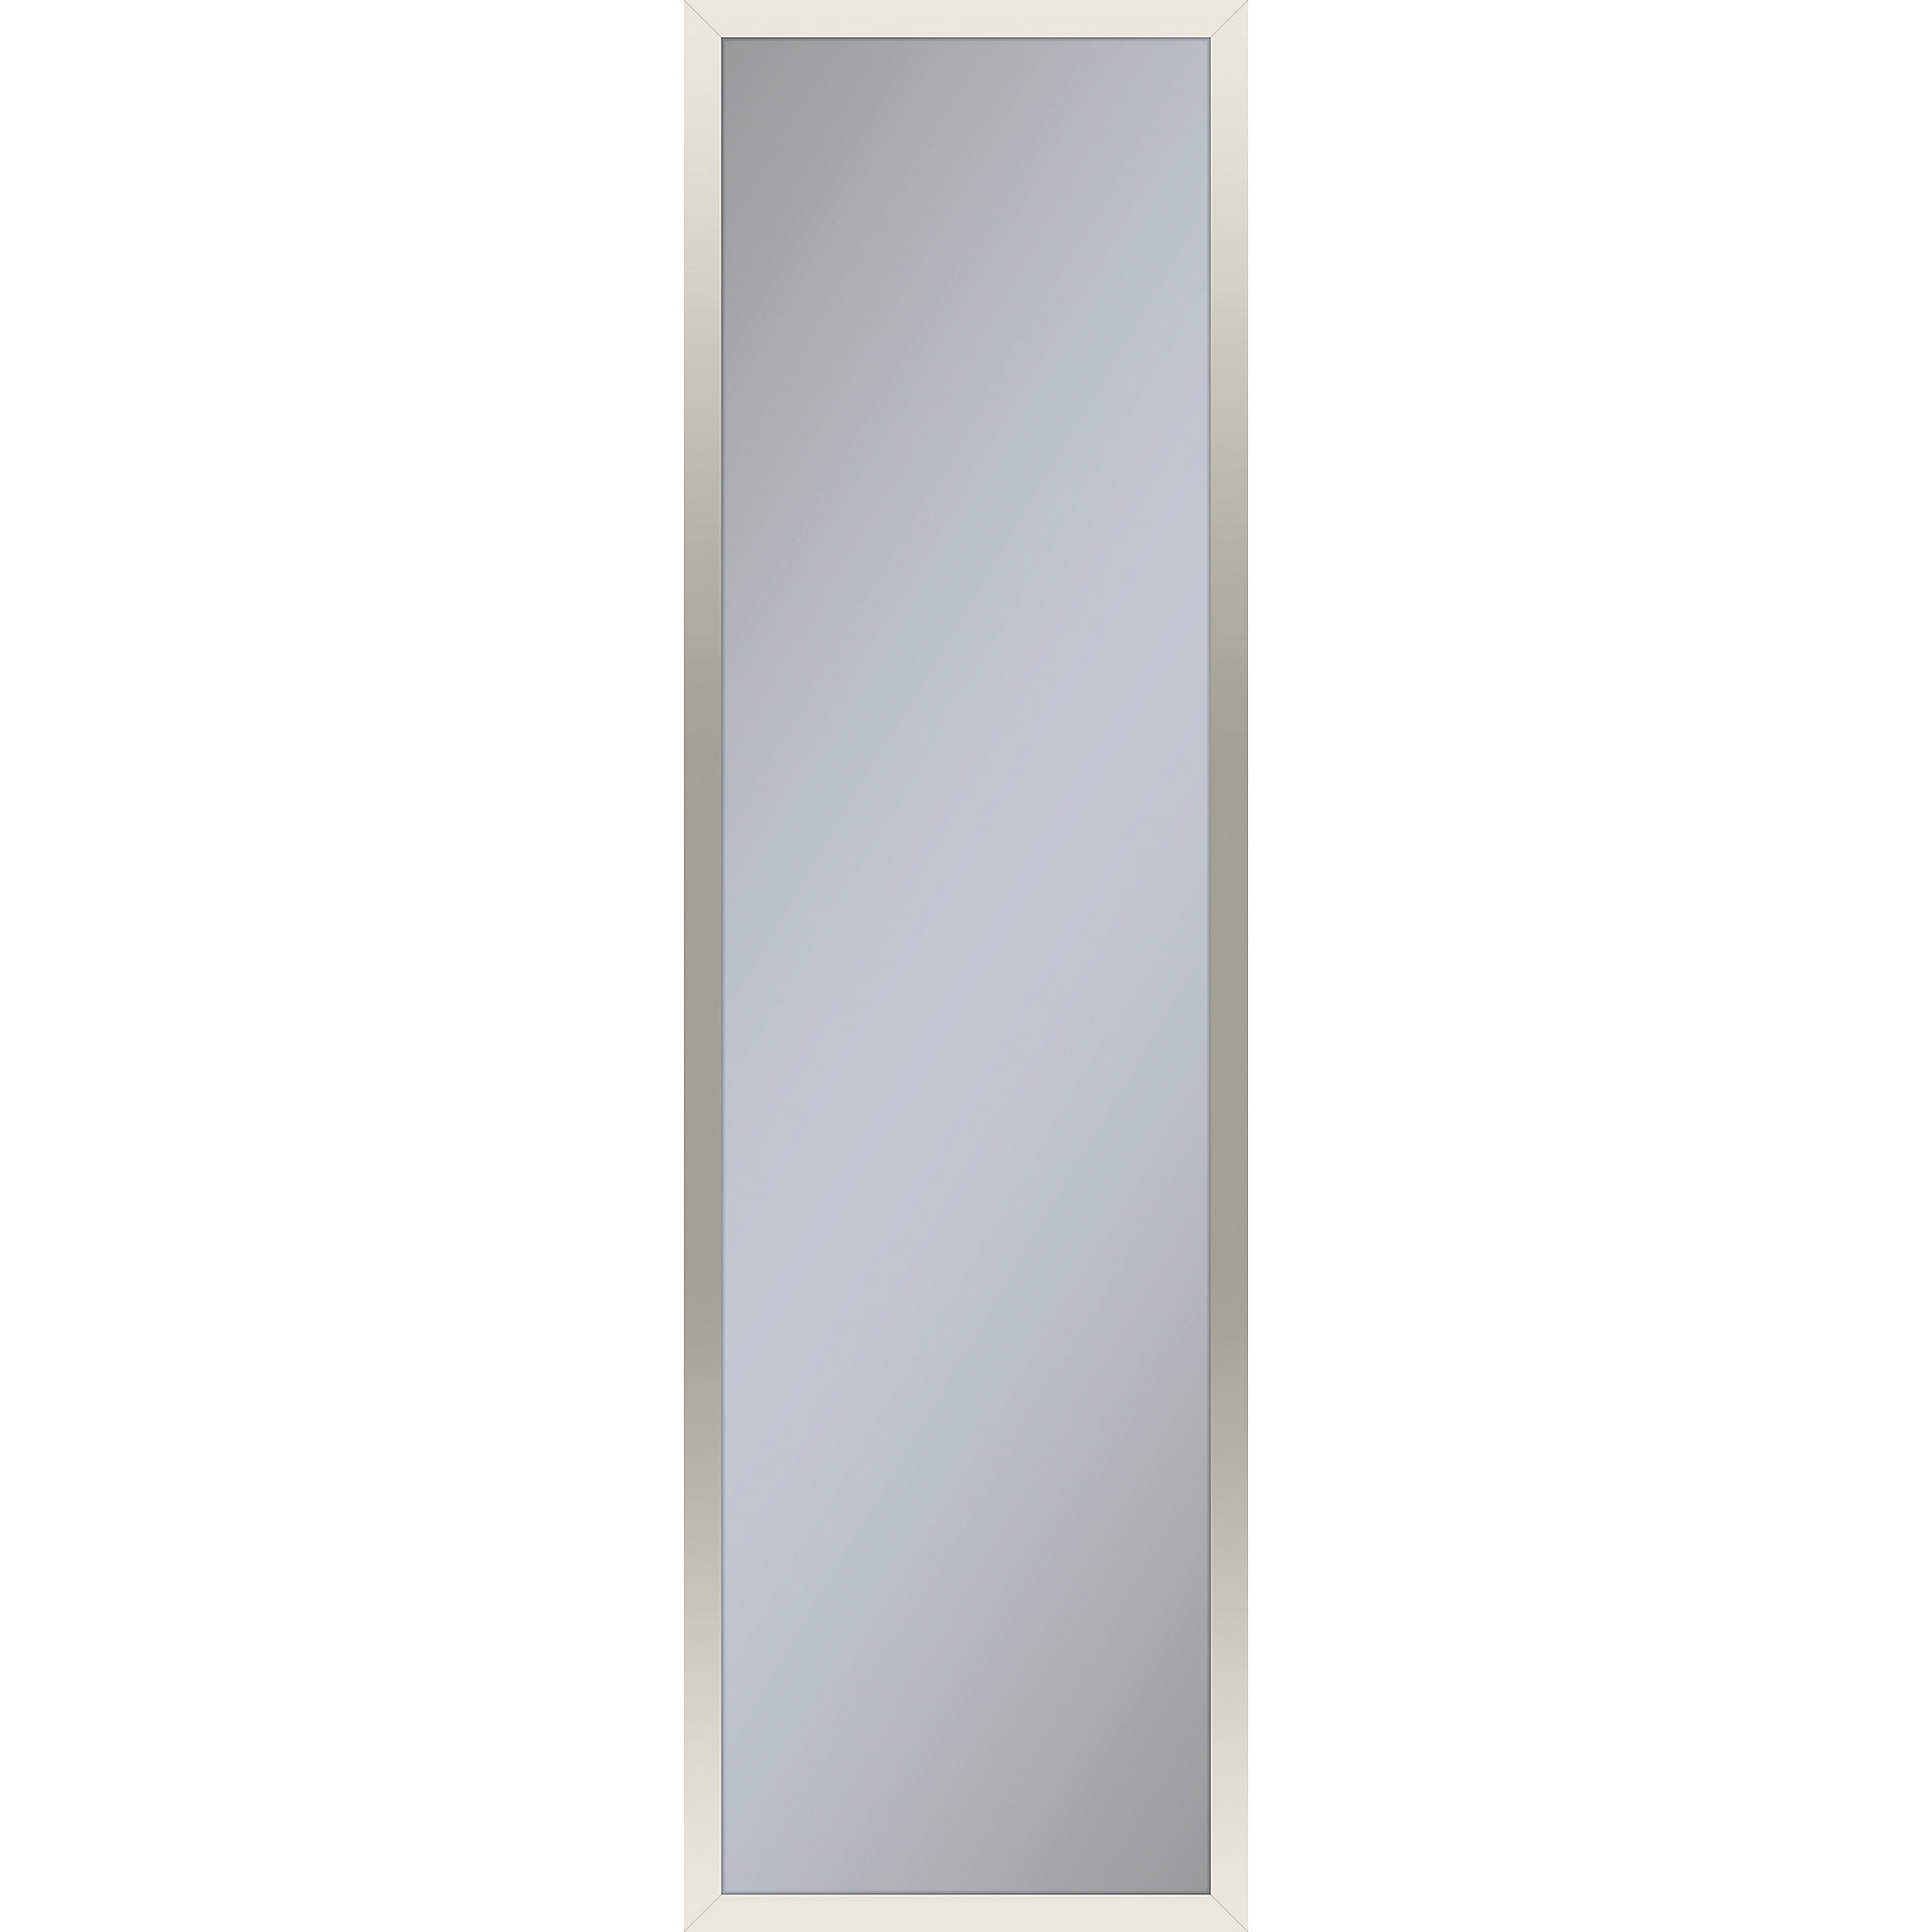 Robern PC1240D6TNN77 Profiles Framed Cabinet, 12" x 40" x 6", Polished Nickel, Non-Electric, Reversible Hinge